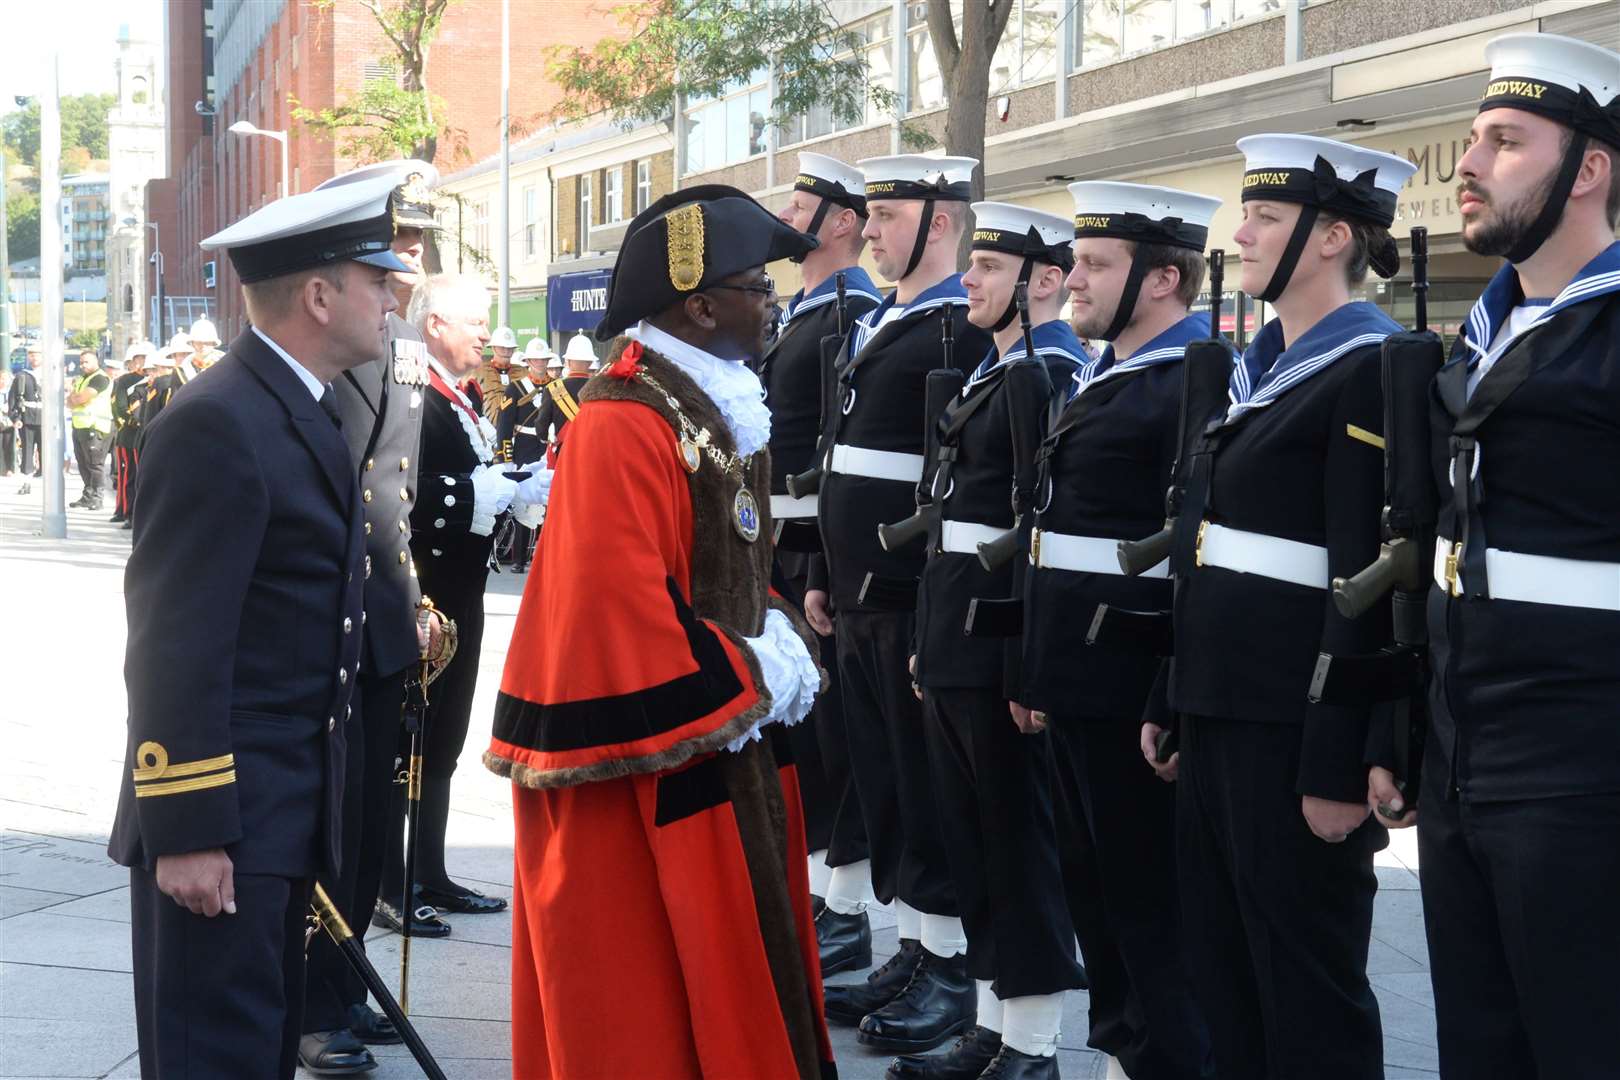 The Mayor of Medway Cllr Habib Tejan inspects the ships company during the freedom parade for HMS Medway in Chatham